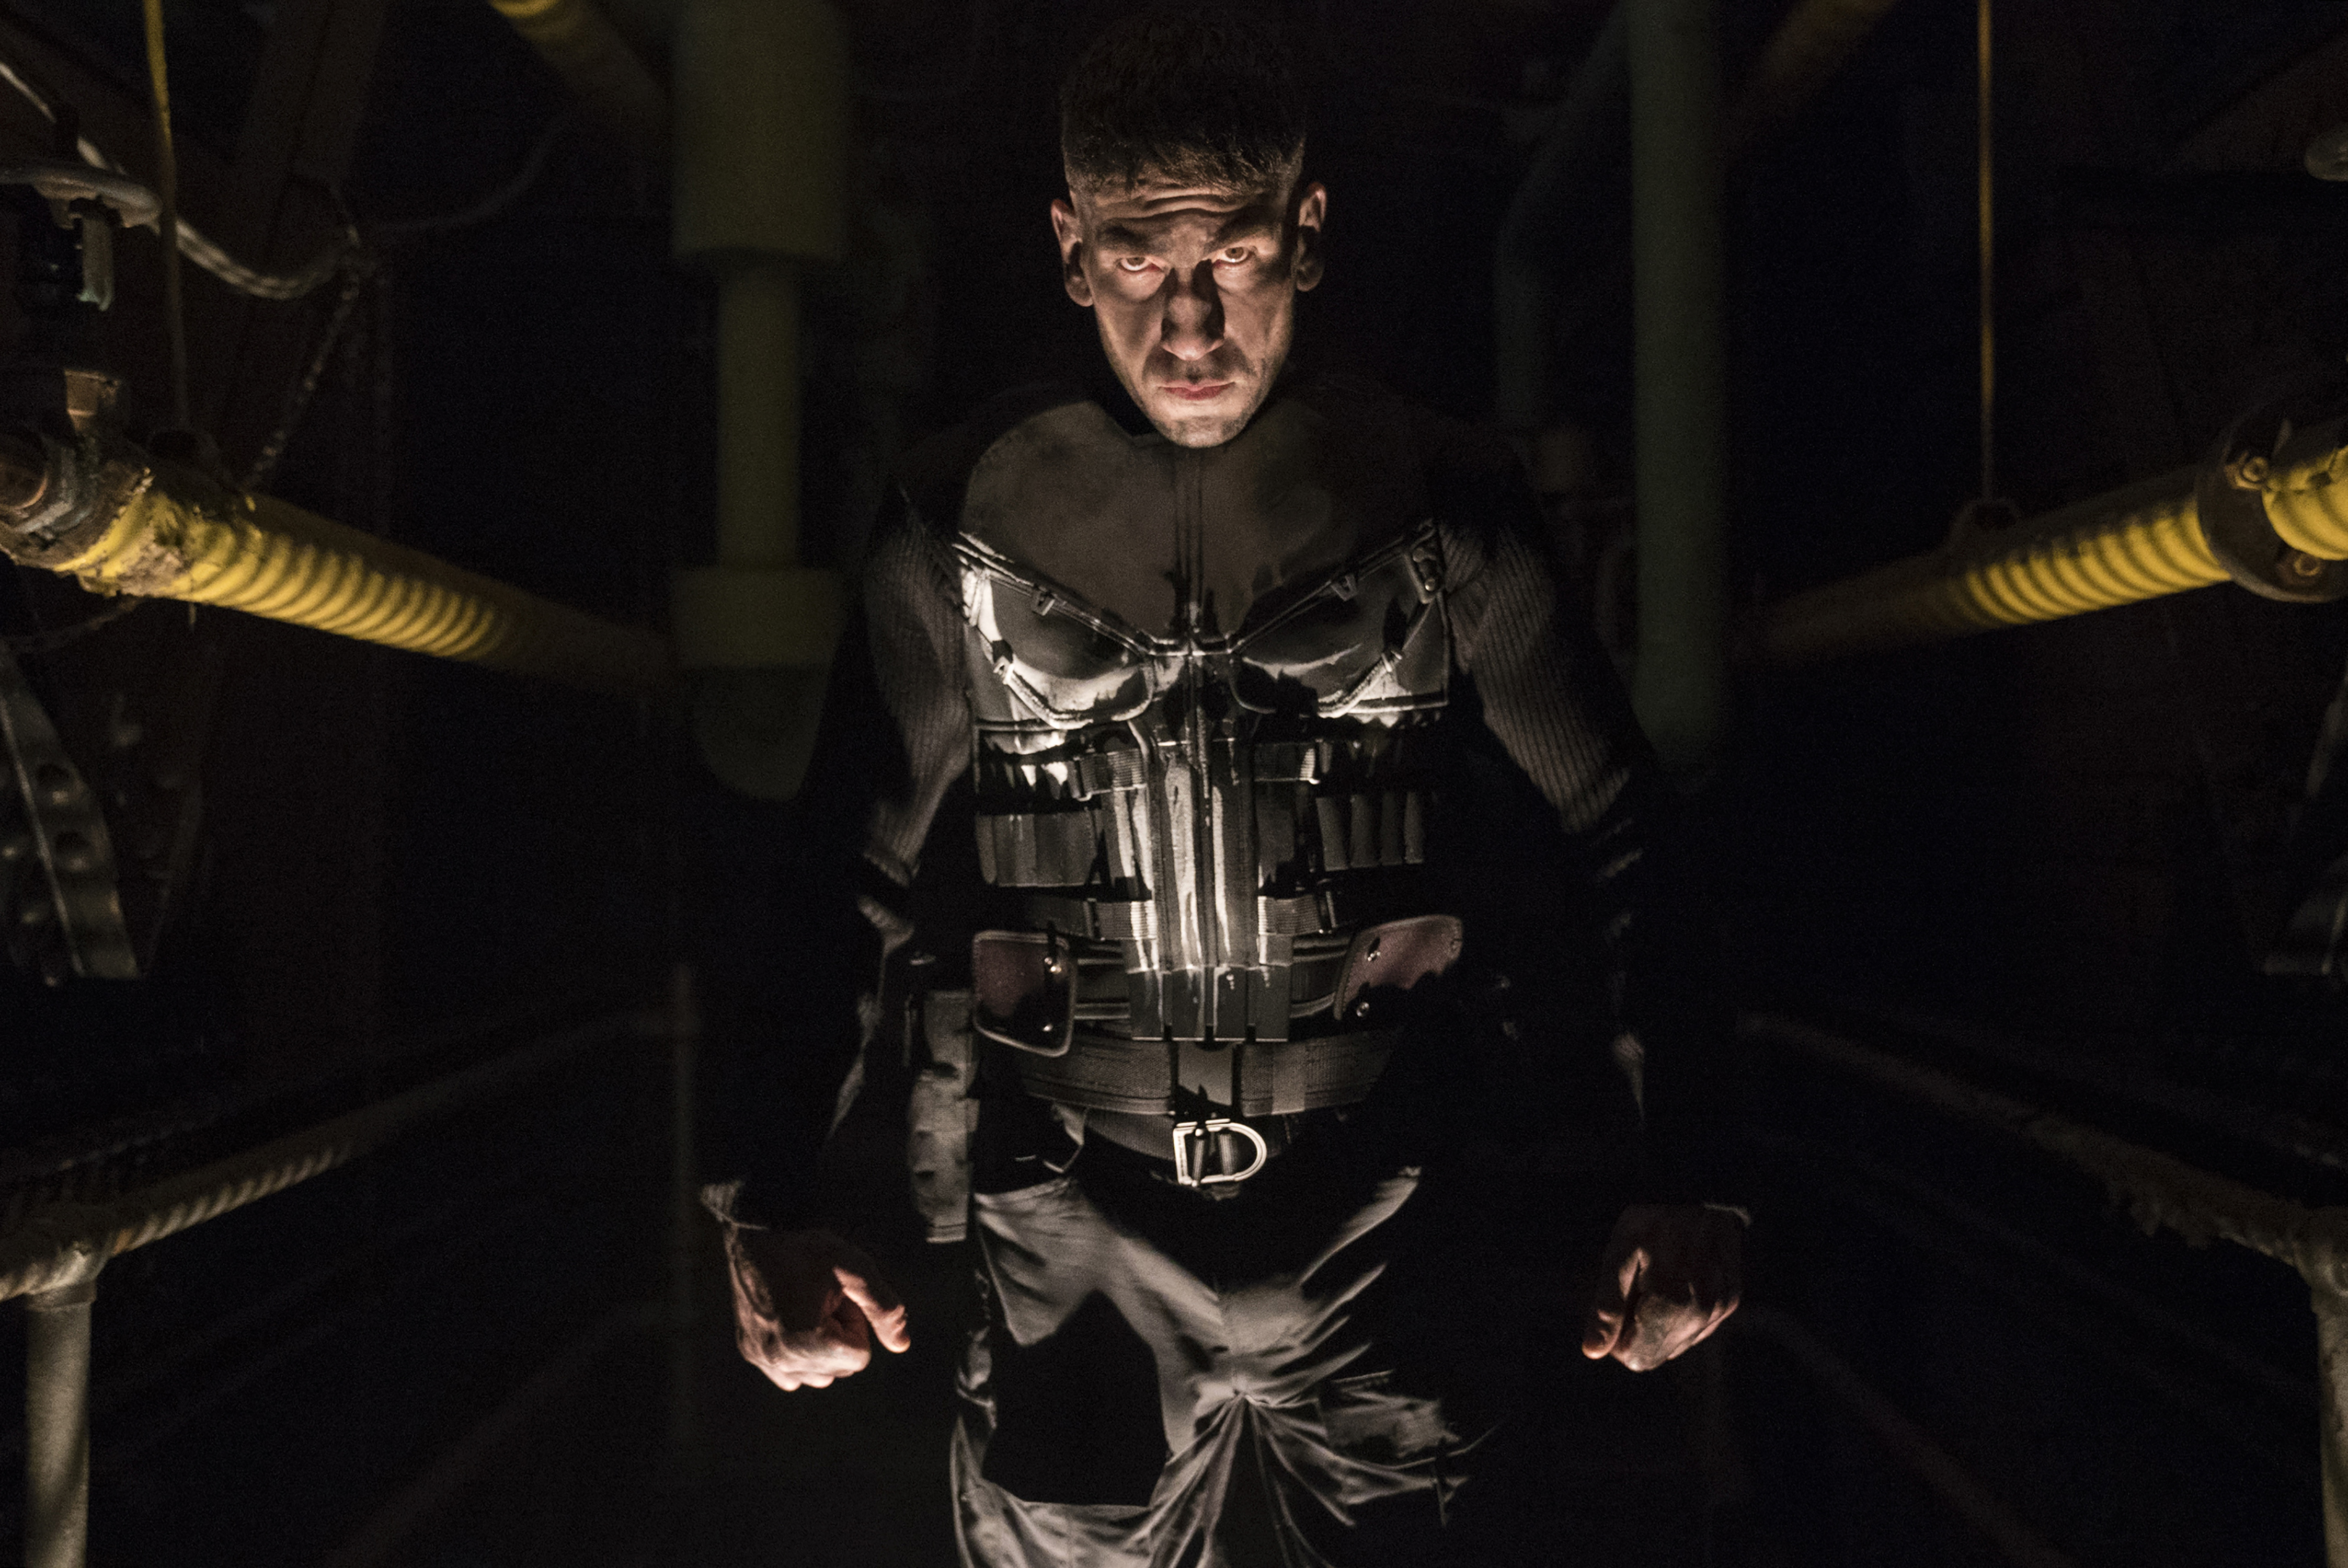 Jon Bernthal as Frank Castle, the Punisher, in his 2017 Netflix series.